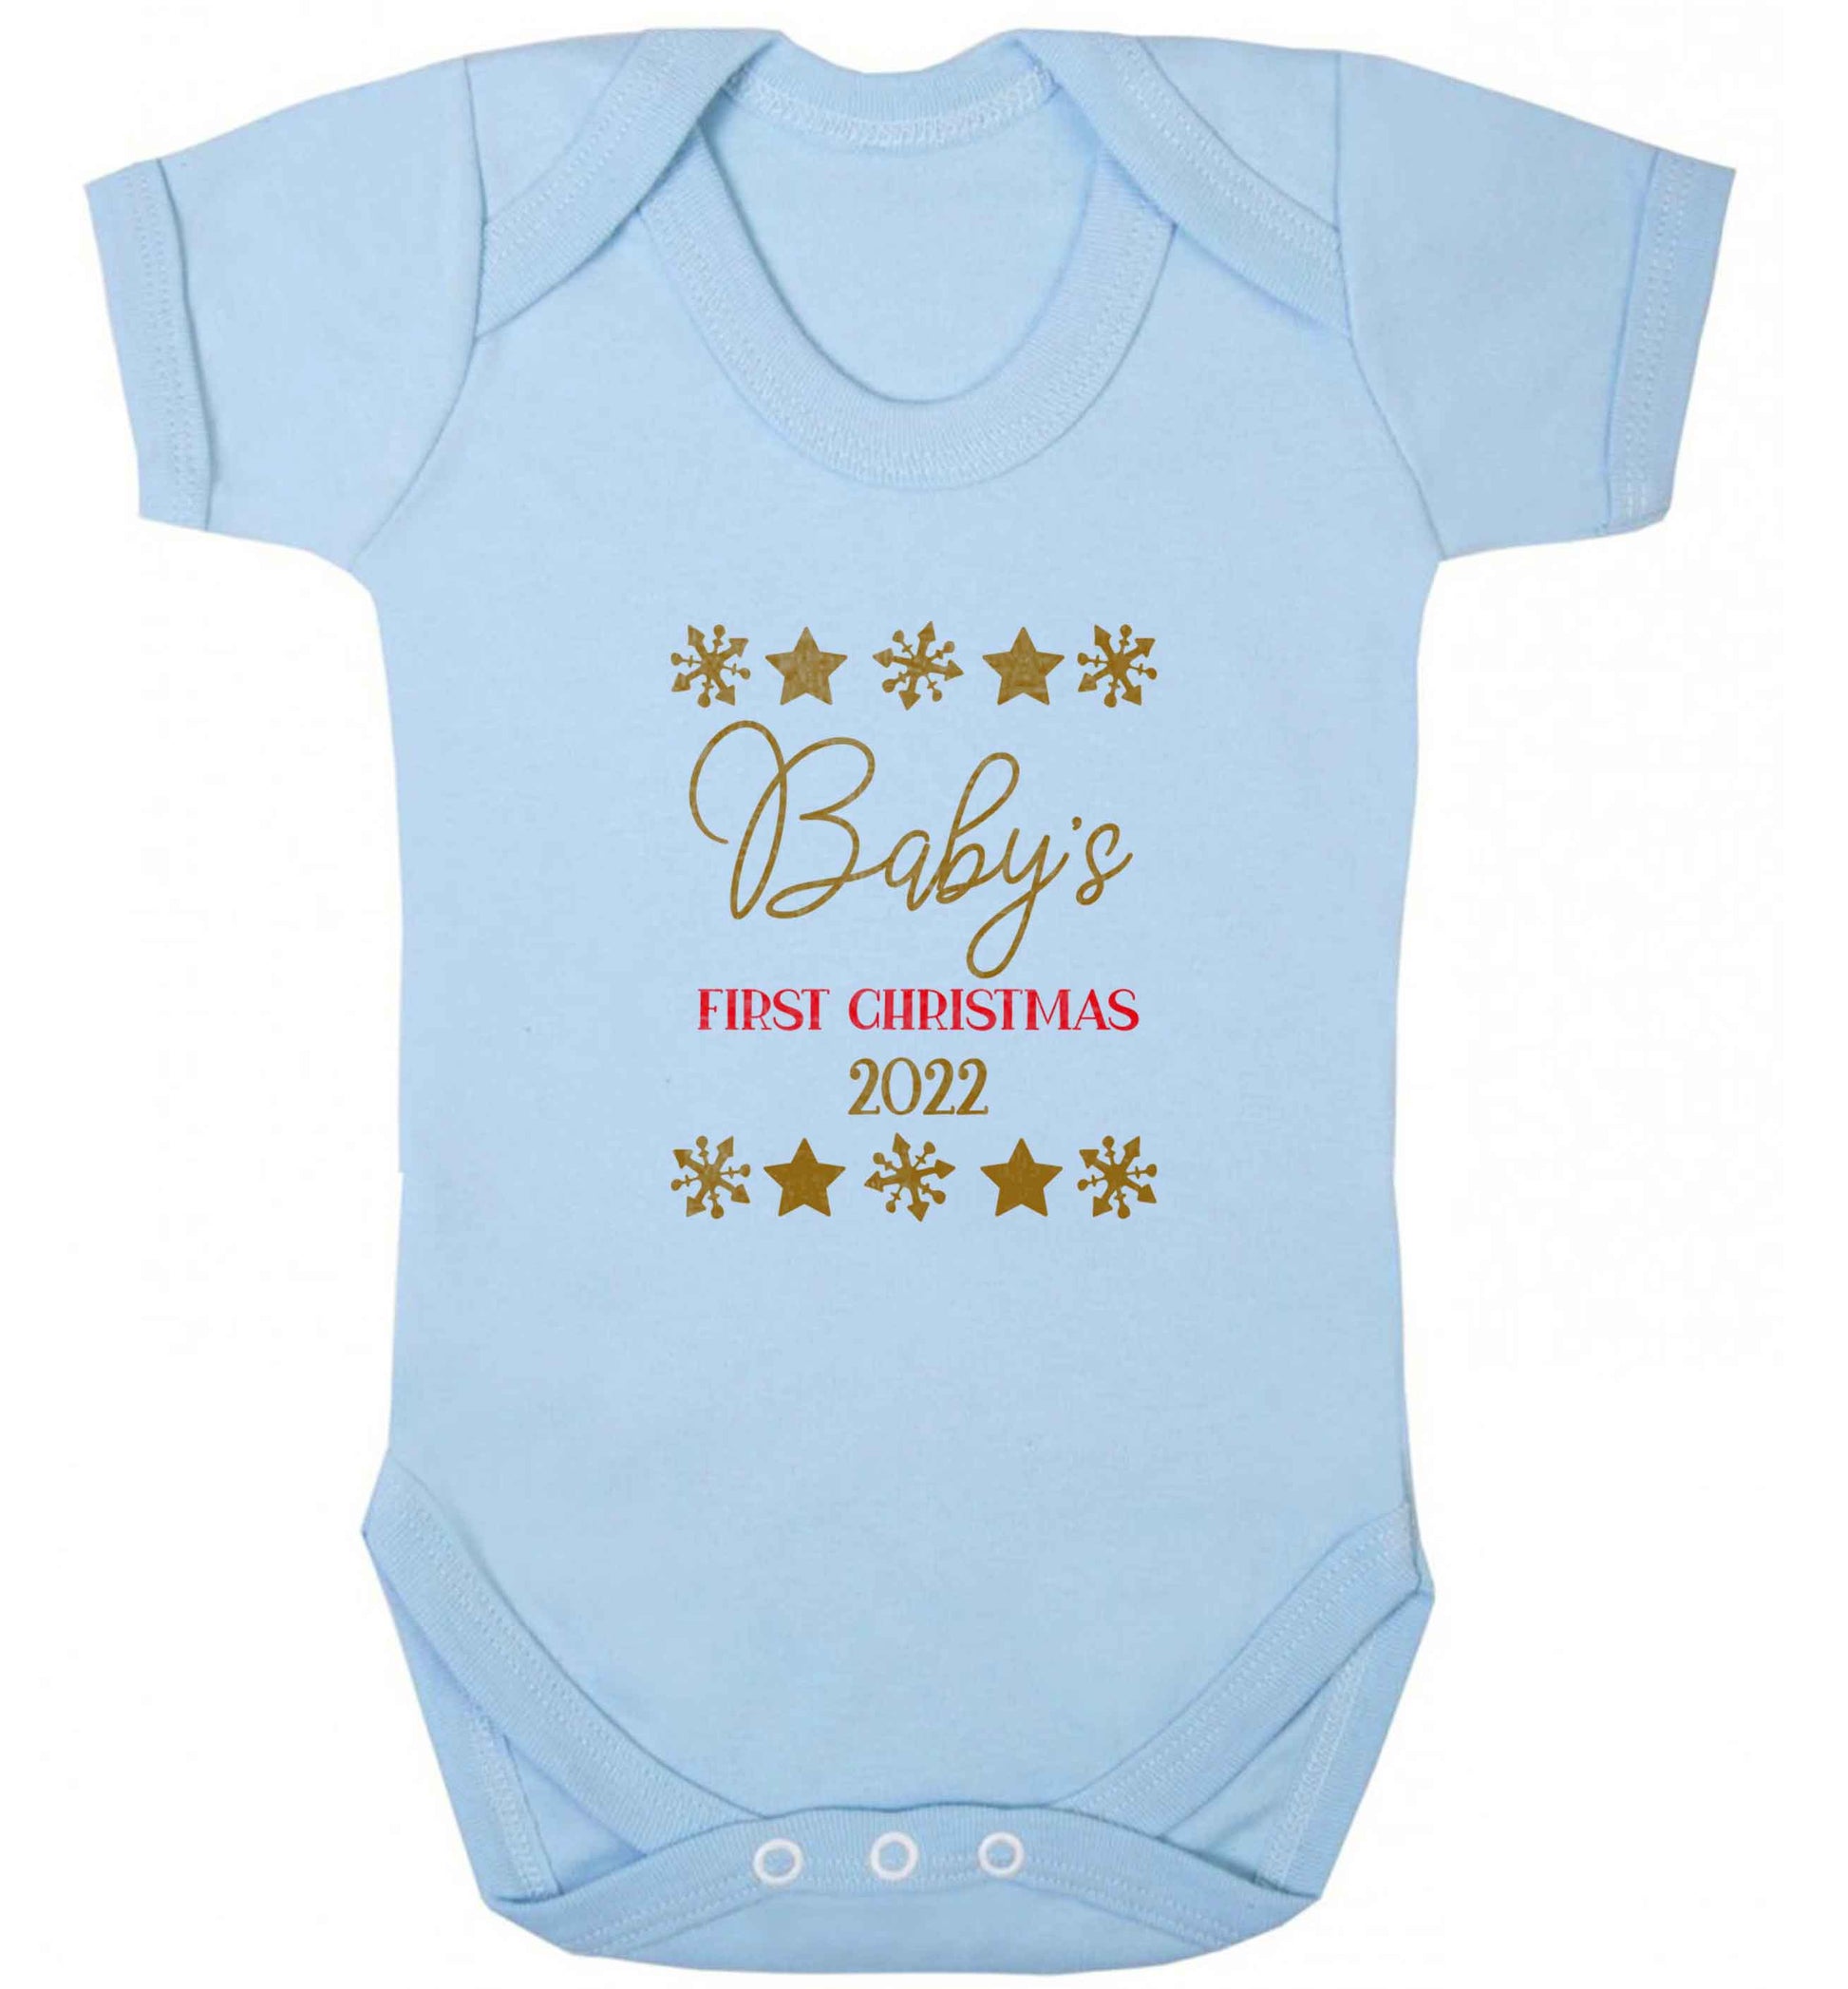 Baby's first Christmas baby vest pale blue 18-24 months